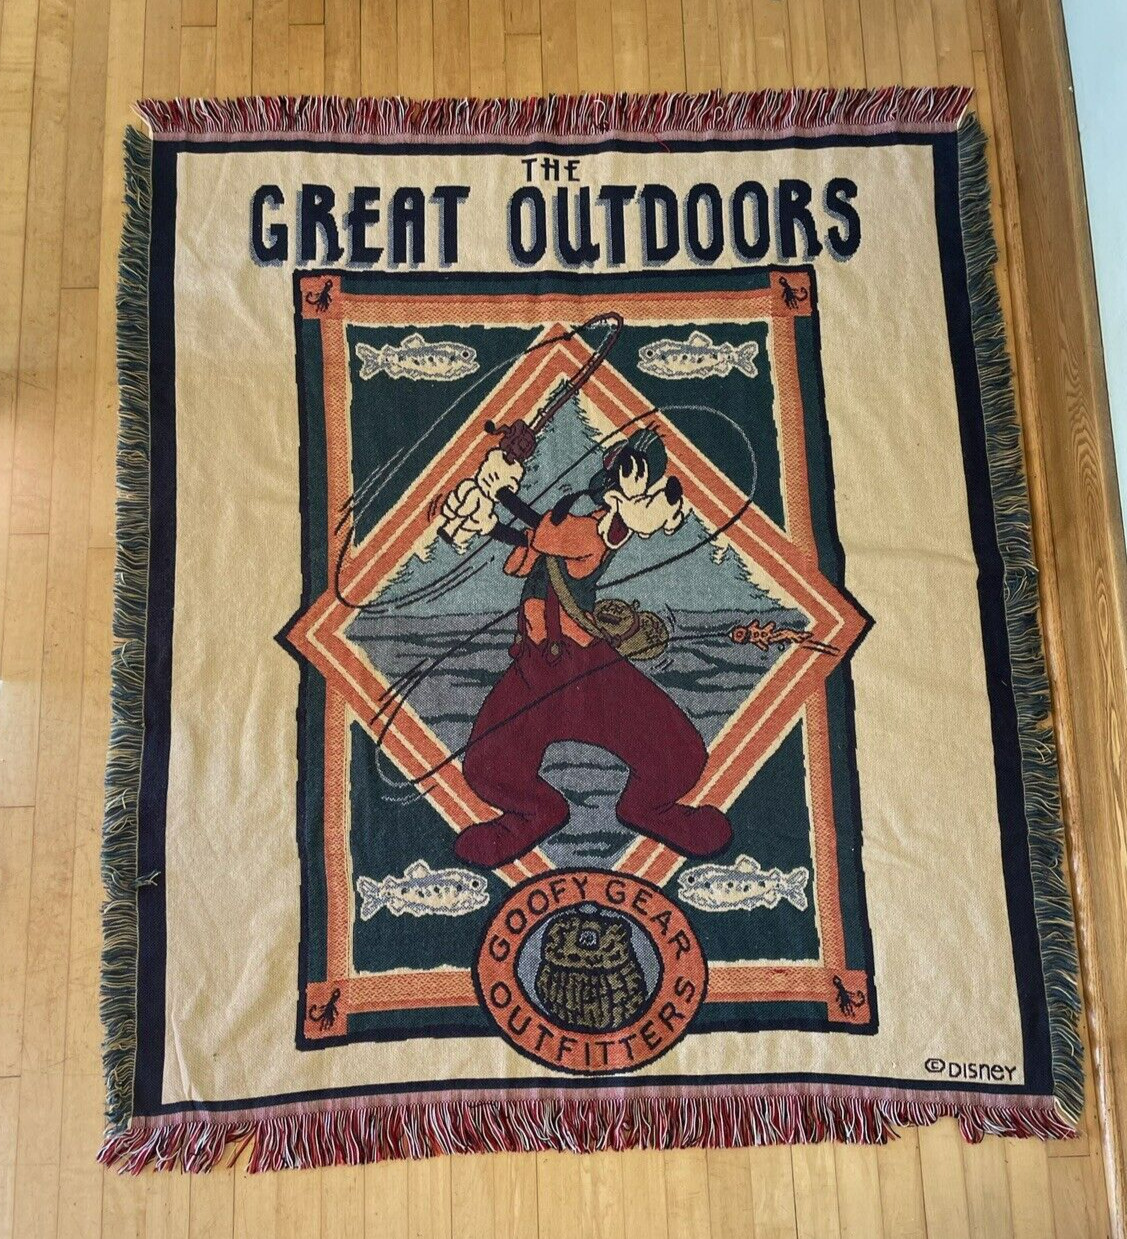 Vintage Disney Goofy Gear Outfitters Knitted Throw Blanket Great Outdoors Woven